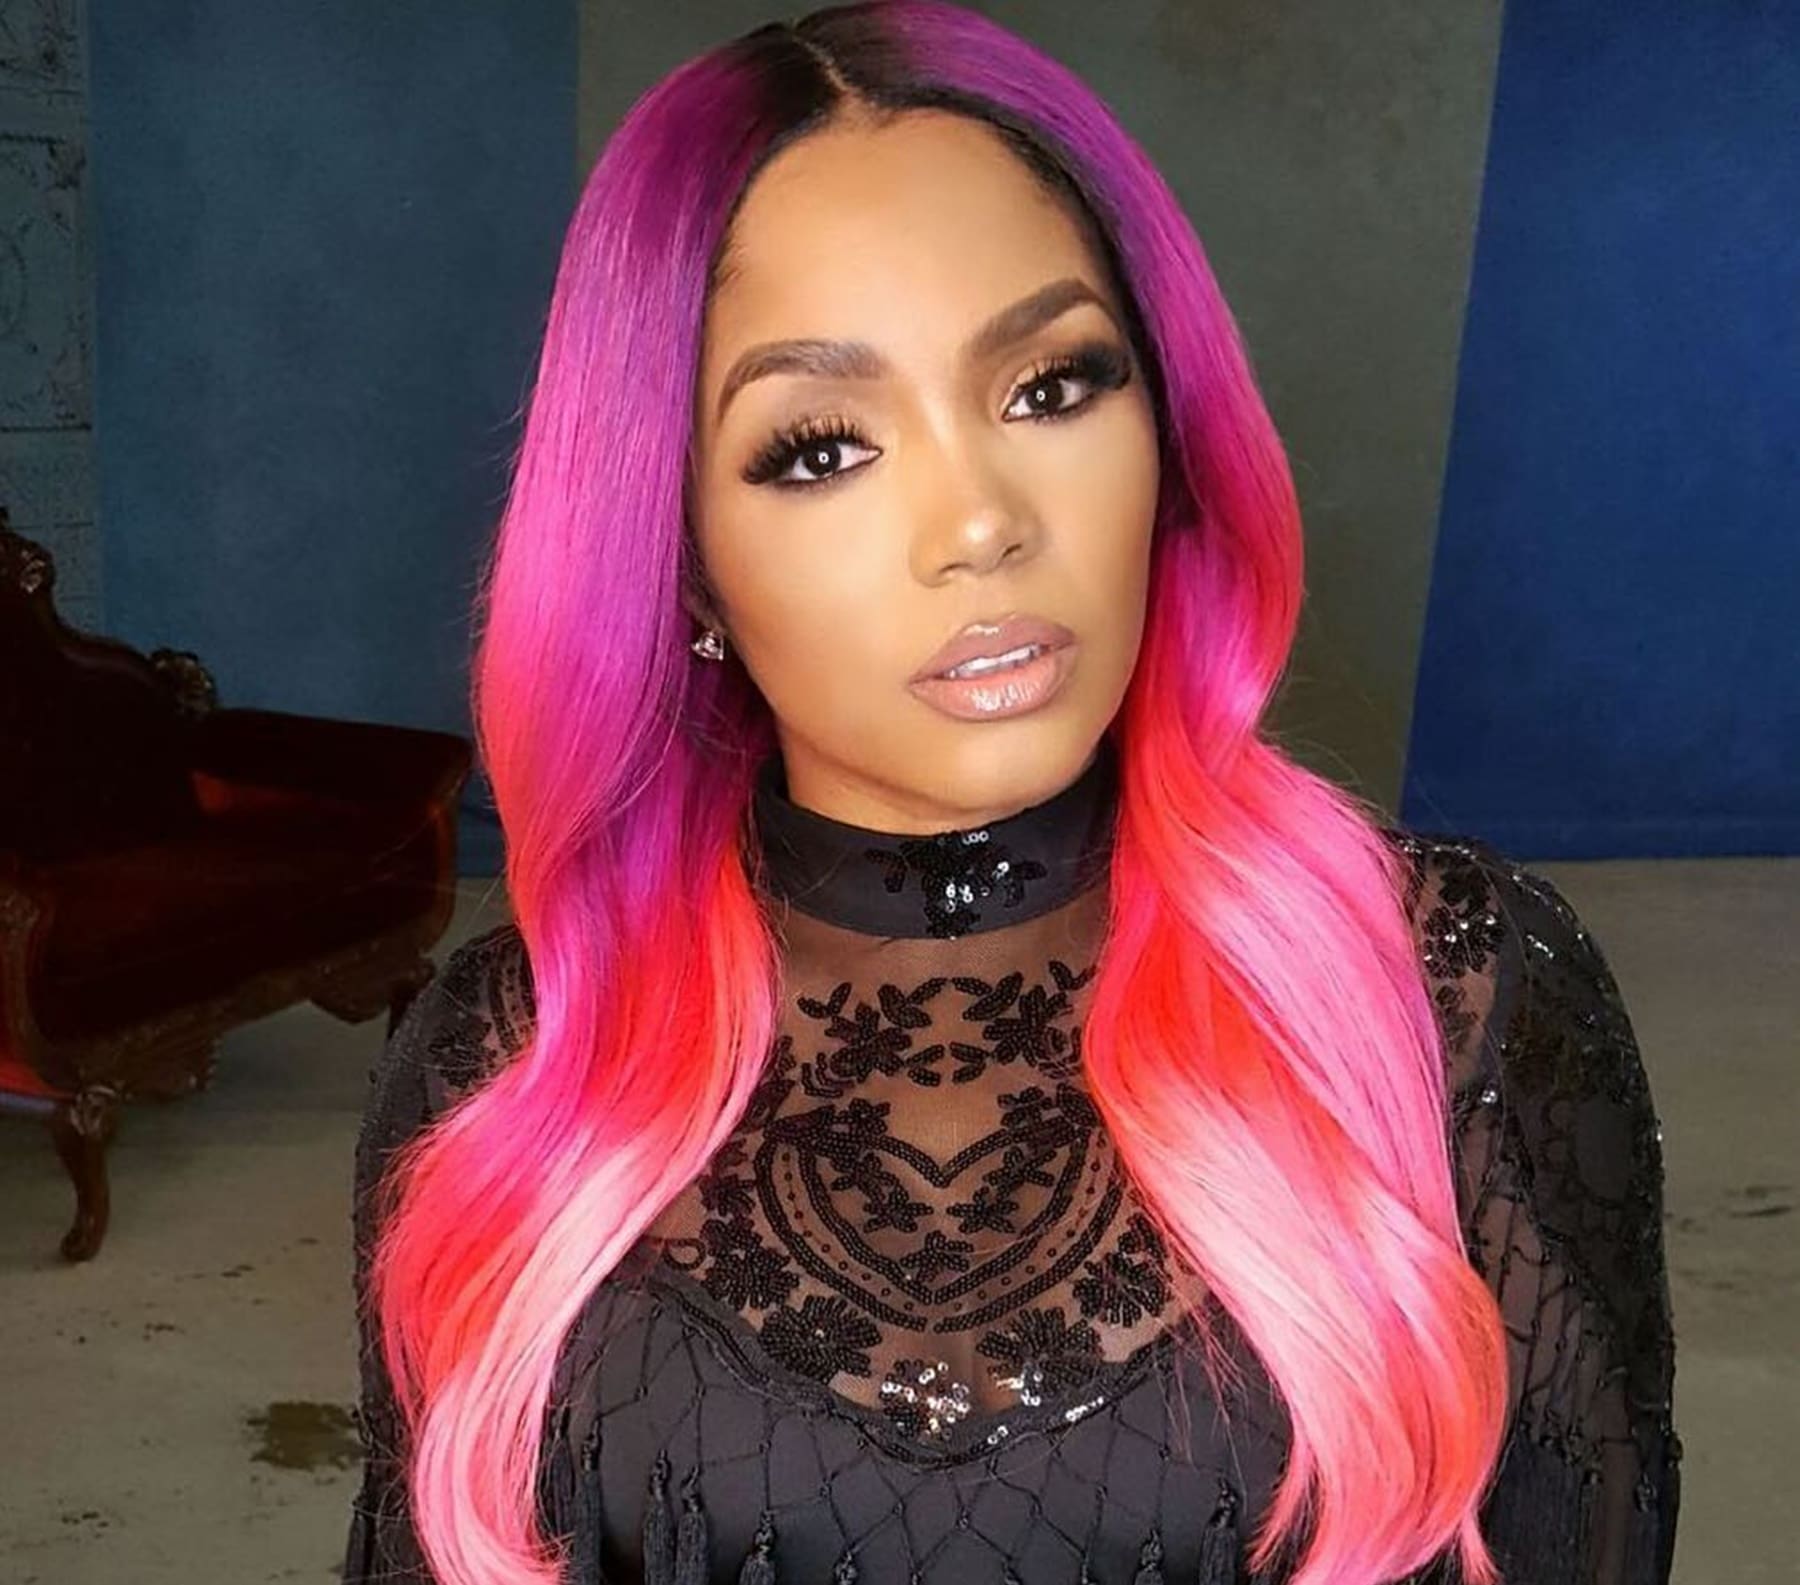 Rasheeda Frost Is 5Lbs Away From Her Goal Weight - See Her Video!